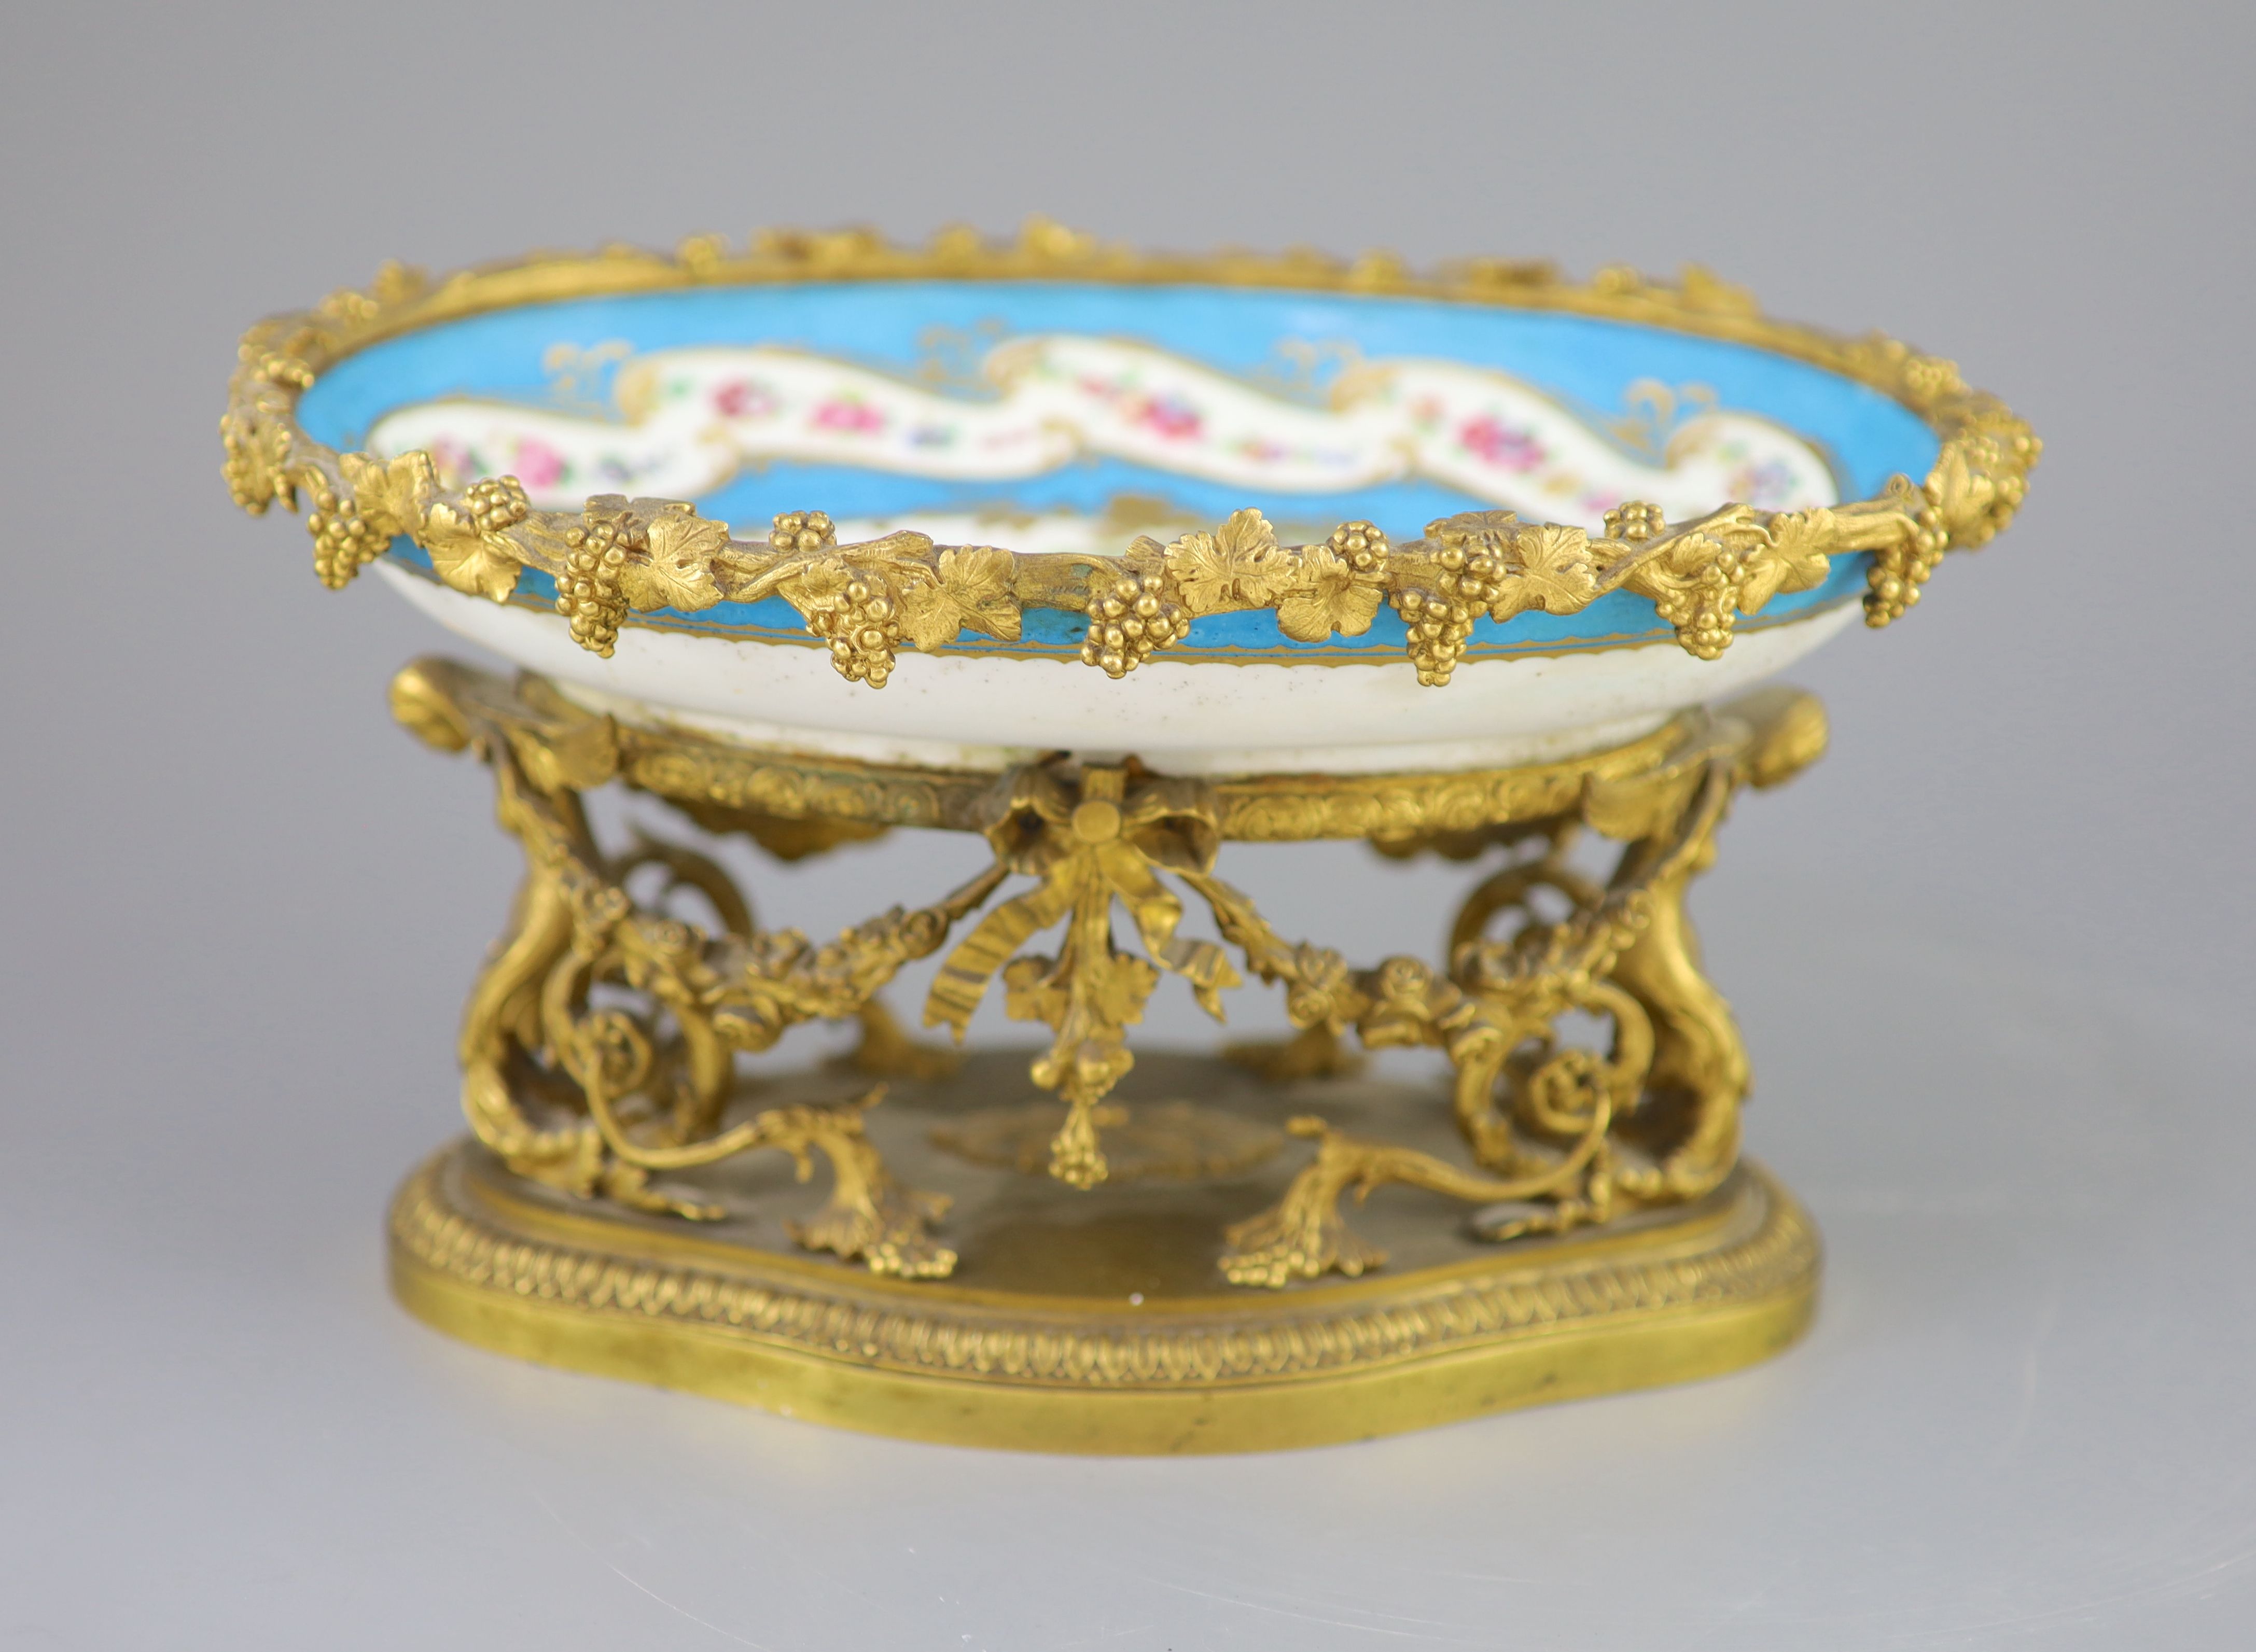 A French Sevres style porcelain and ormolu mounted oval centrepiece dish, 19th century, 28.5cm across